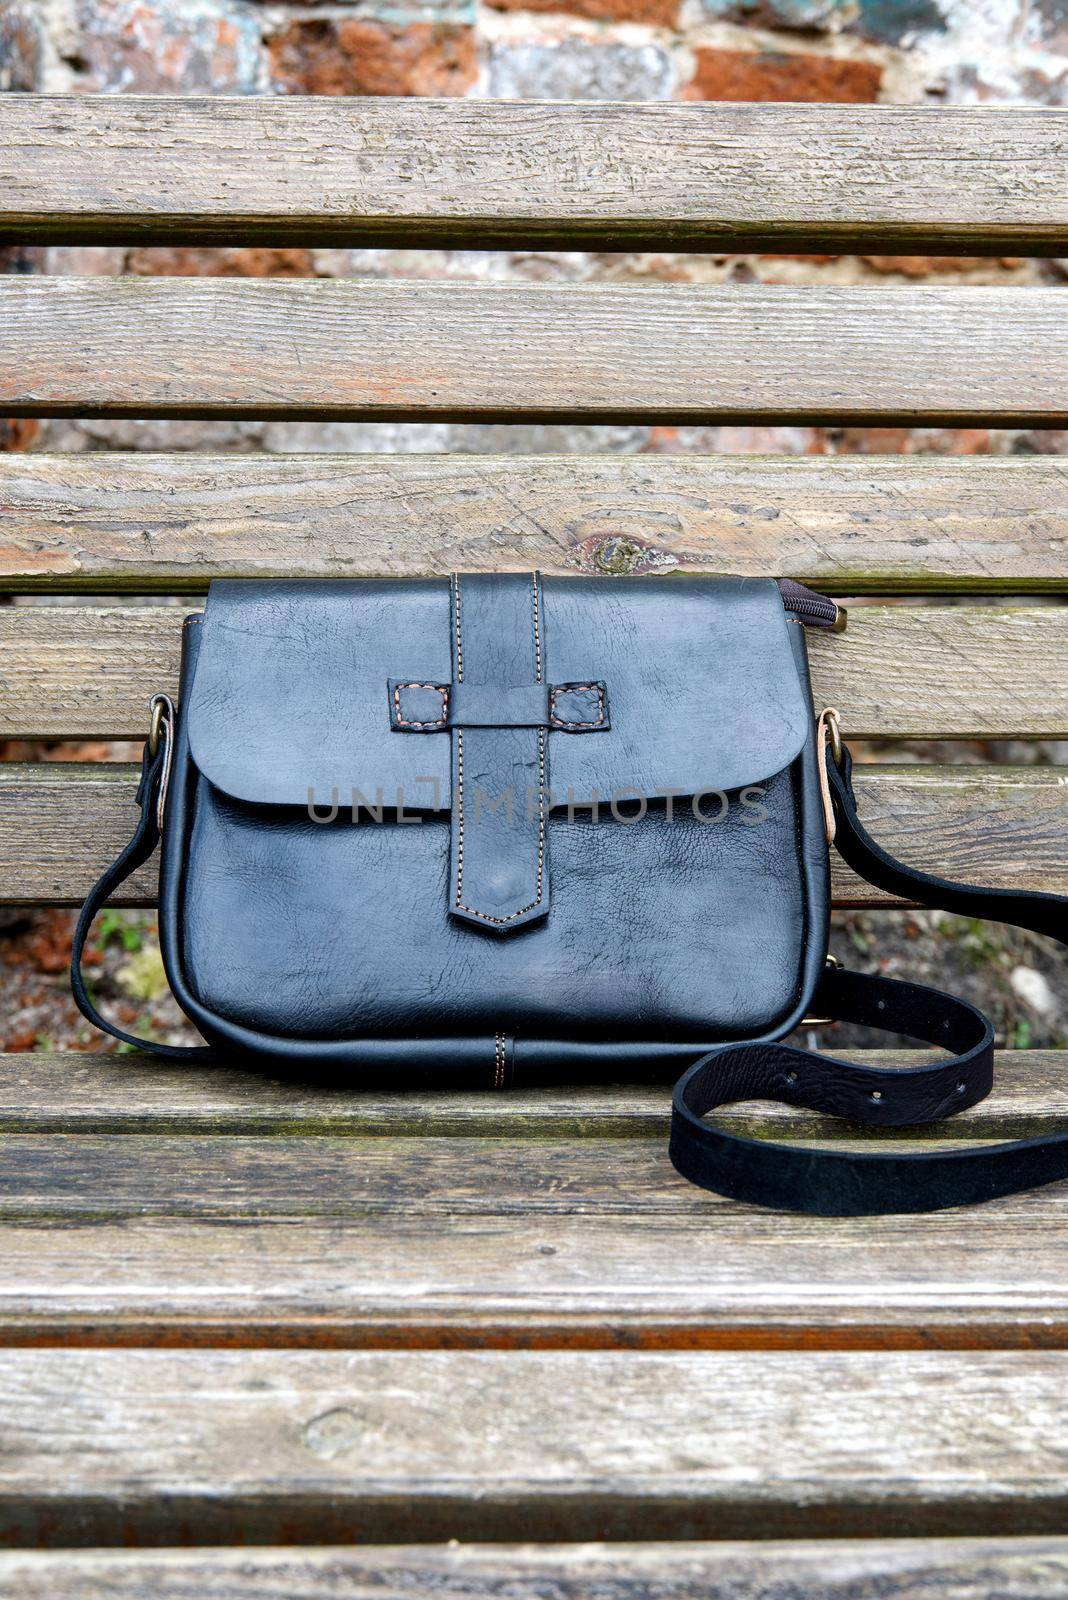 close-up photo of black leather handbag on a wooden bench by Ashtray25